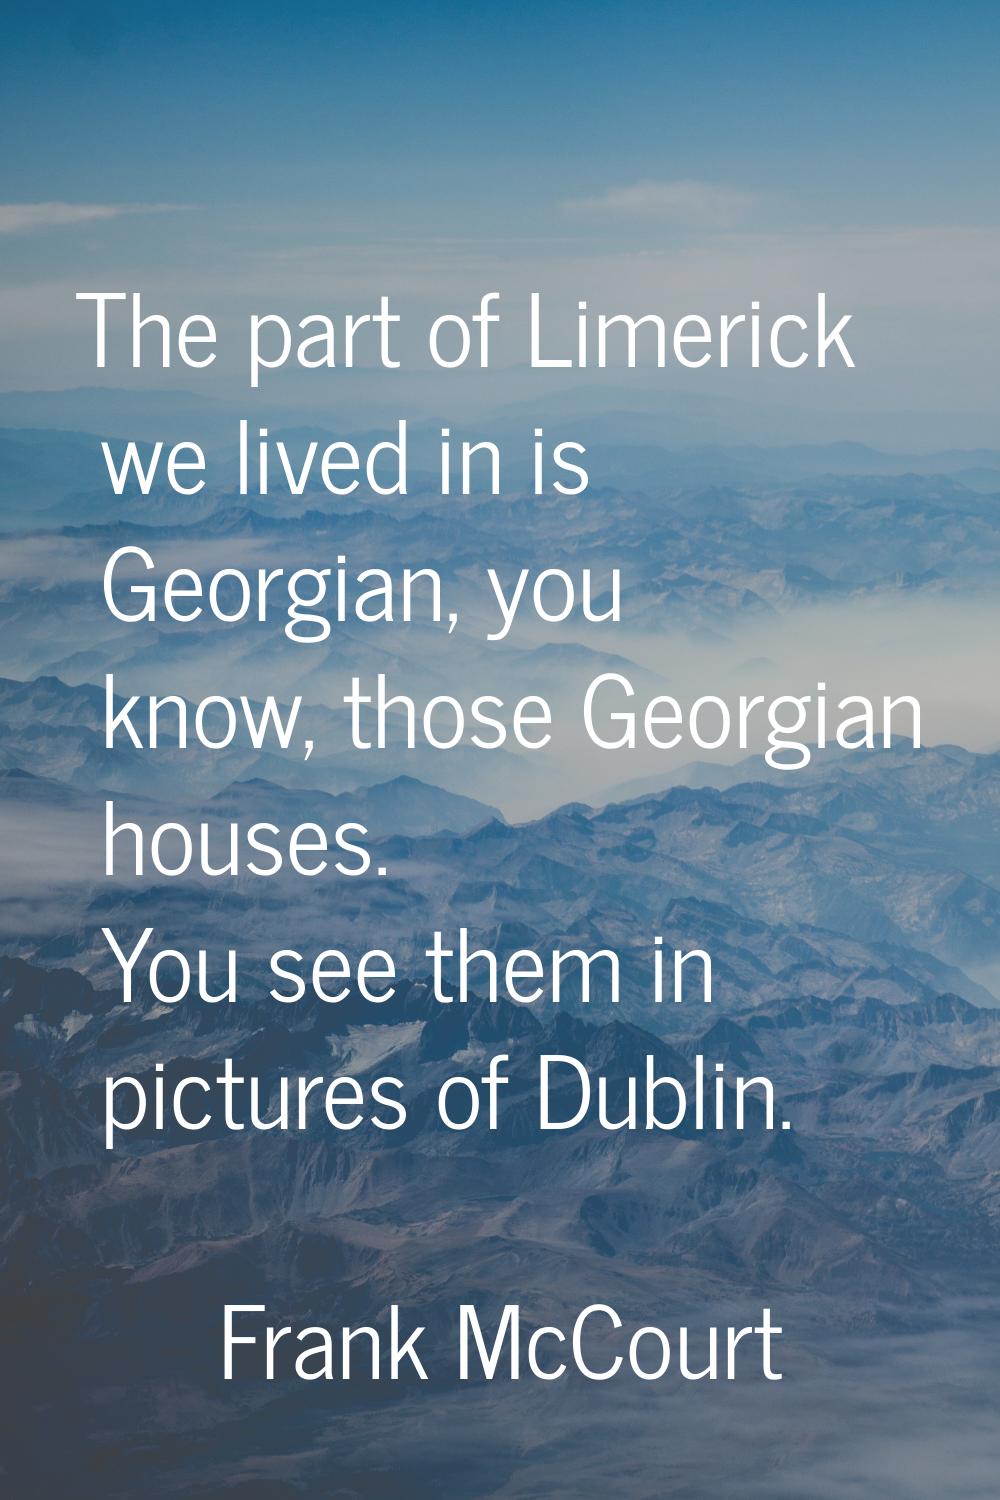 The part of Limerick we lived in is Georgian, you know, those Georgian houses. You see them in pict